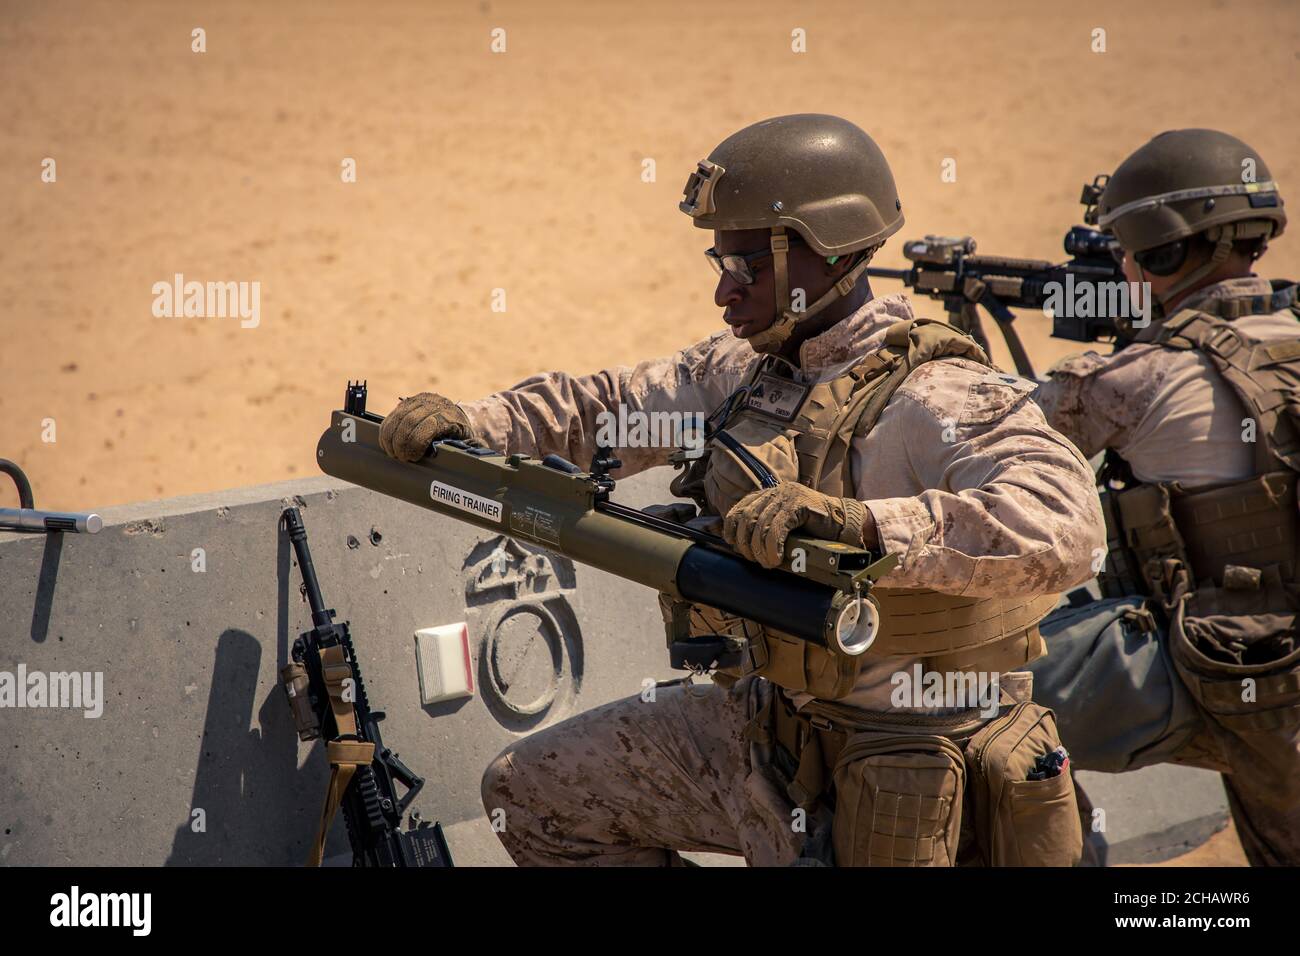 A U.S. Marine with 2nd Battalion, 5th Marine Regiment, assigned to Special Purpose Marine Air-Ground Task Force Crisis Response - Central Command 20.2, prepares to fire an M72A7 Light Anti-Tank Weapon (LAW) System during an anti-armor range in Kuwait, Sept. 3, 2020. The training focused on integrating anti-armor capabilities at the platoon level. The SPMAGTF-CR-CC is a crisis response force, prepared to deploy a variety of capabilities across the region. (U.S. Marine Corps photo by Lance Cpl. Andrew Skiver) Stock Photo